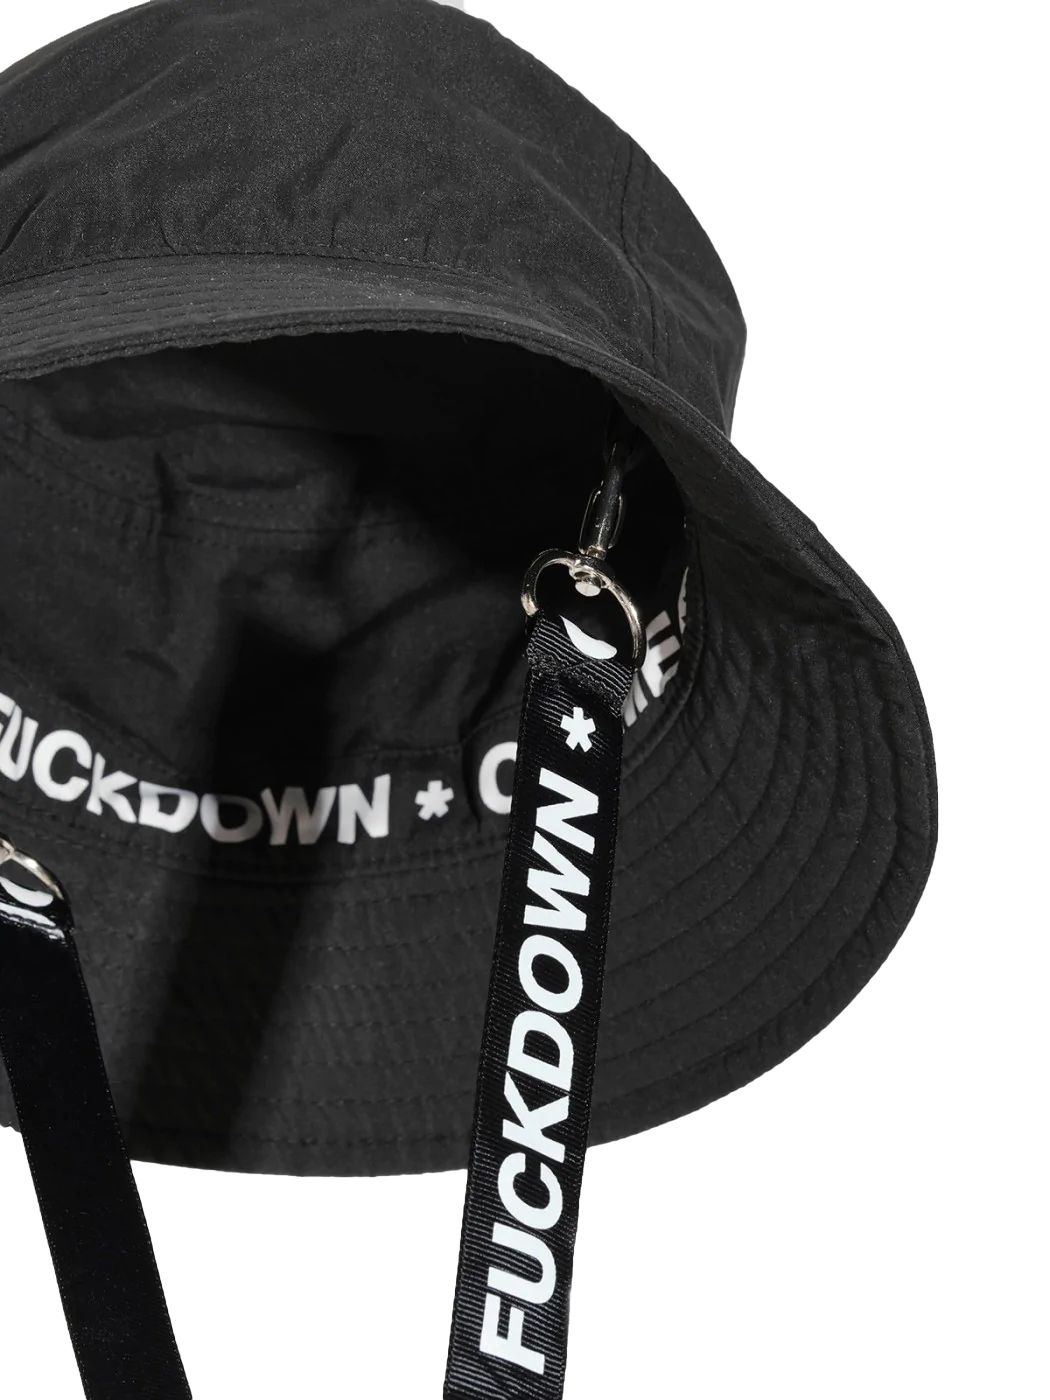 Comme Des Fuckdown Sleek Black Fisherman Hat with Signature Stitching